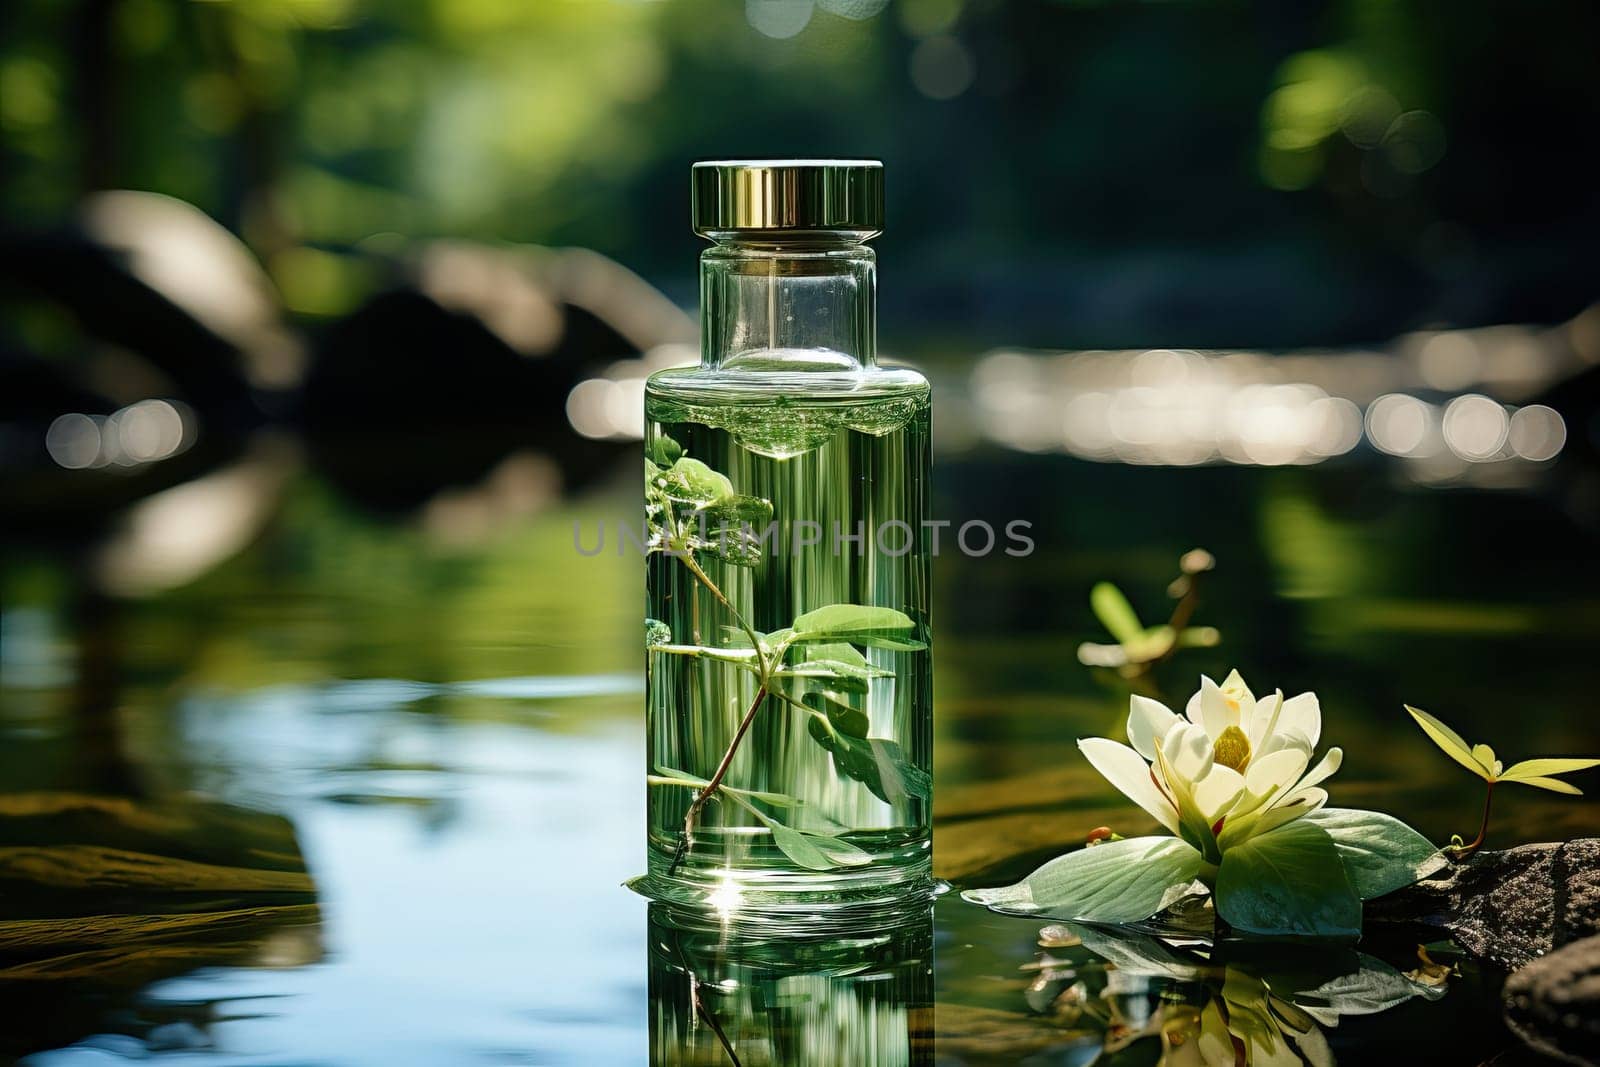 A bottle of fresh toilet water on a natural basis stands in water with green leaves and flowers.